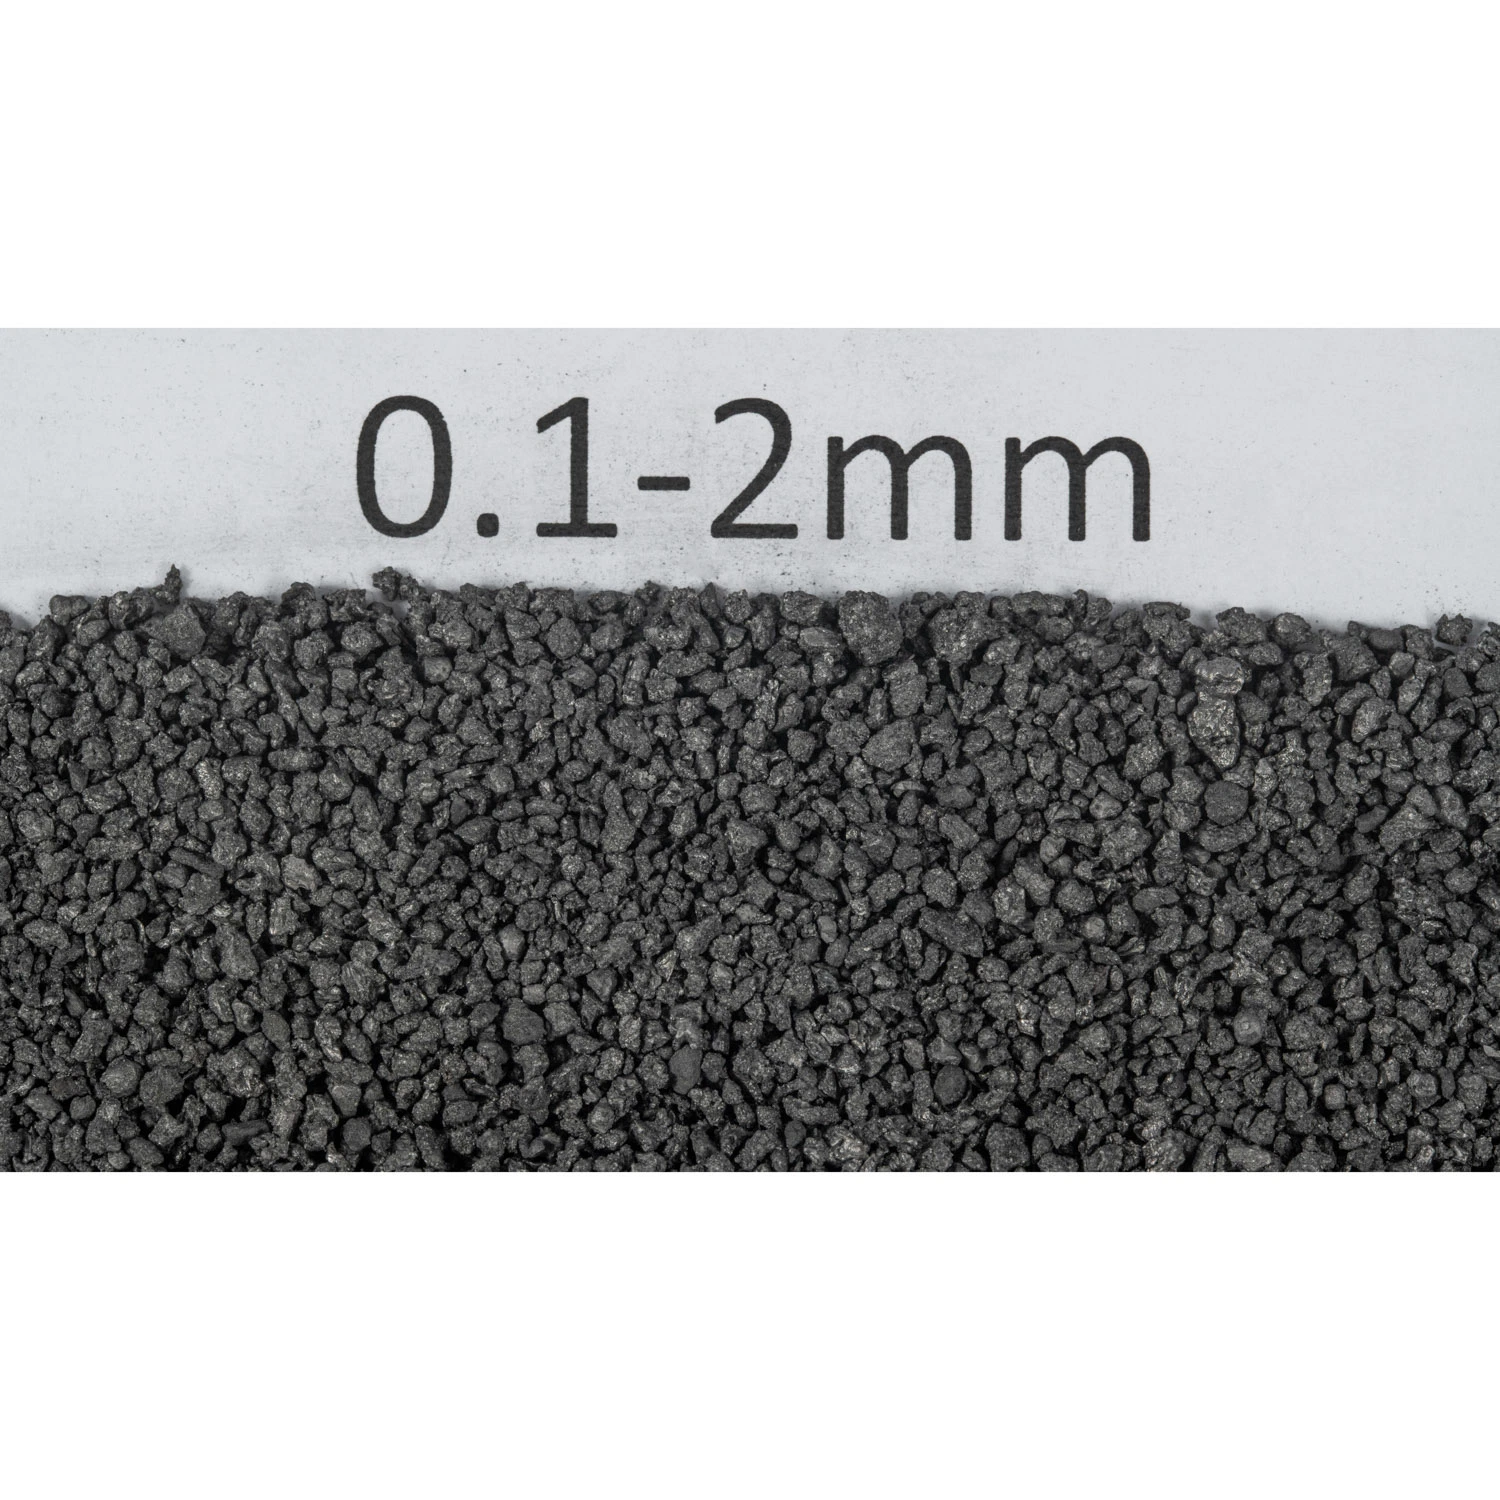 Hengqiao Graphitized Petroleum Coke for Steel and Casting